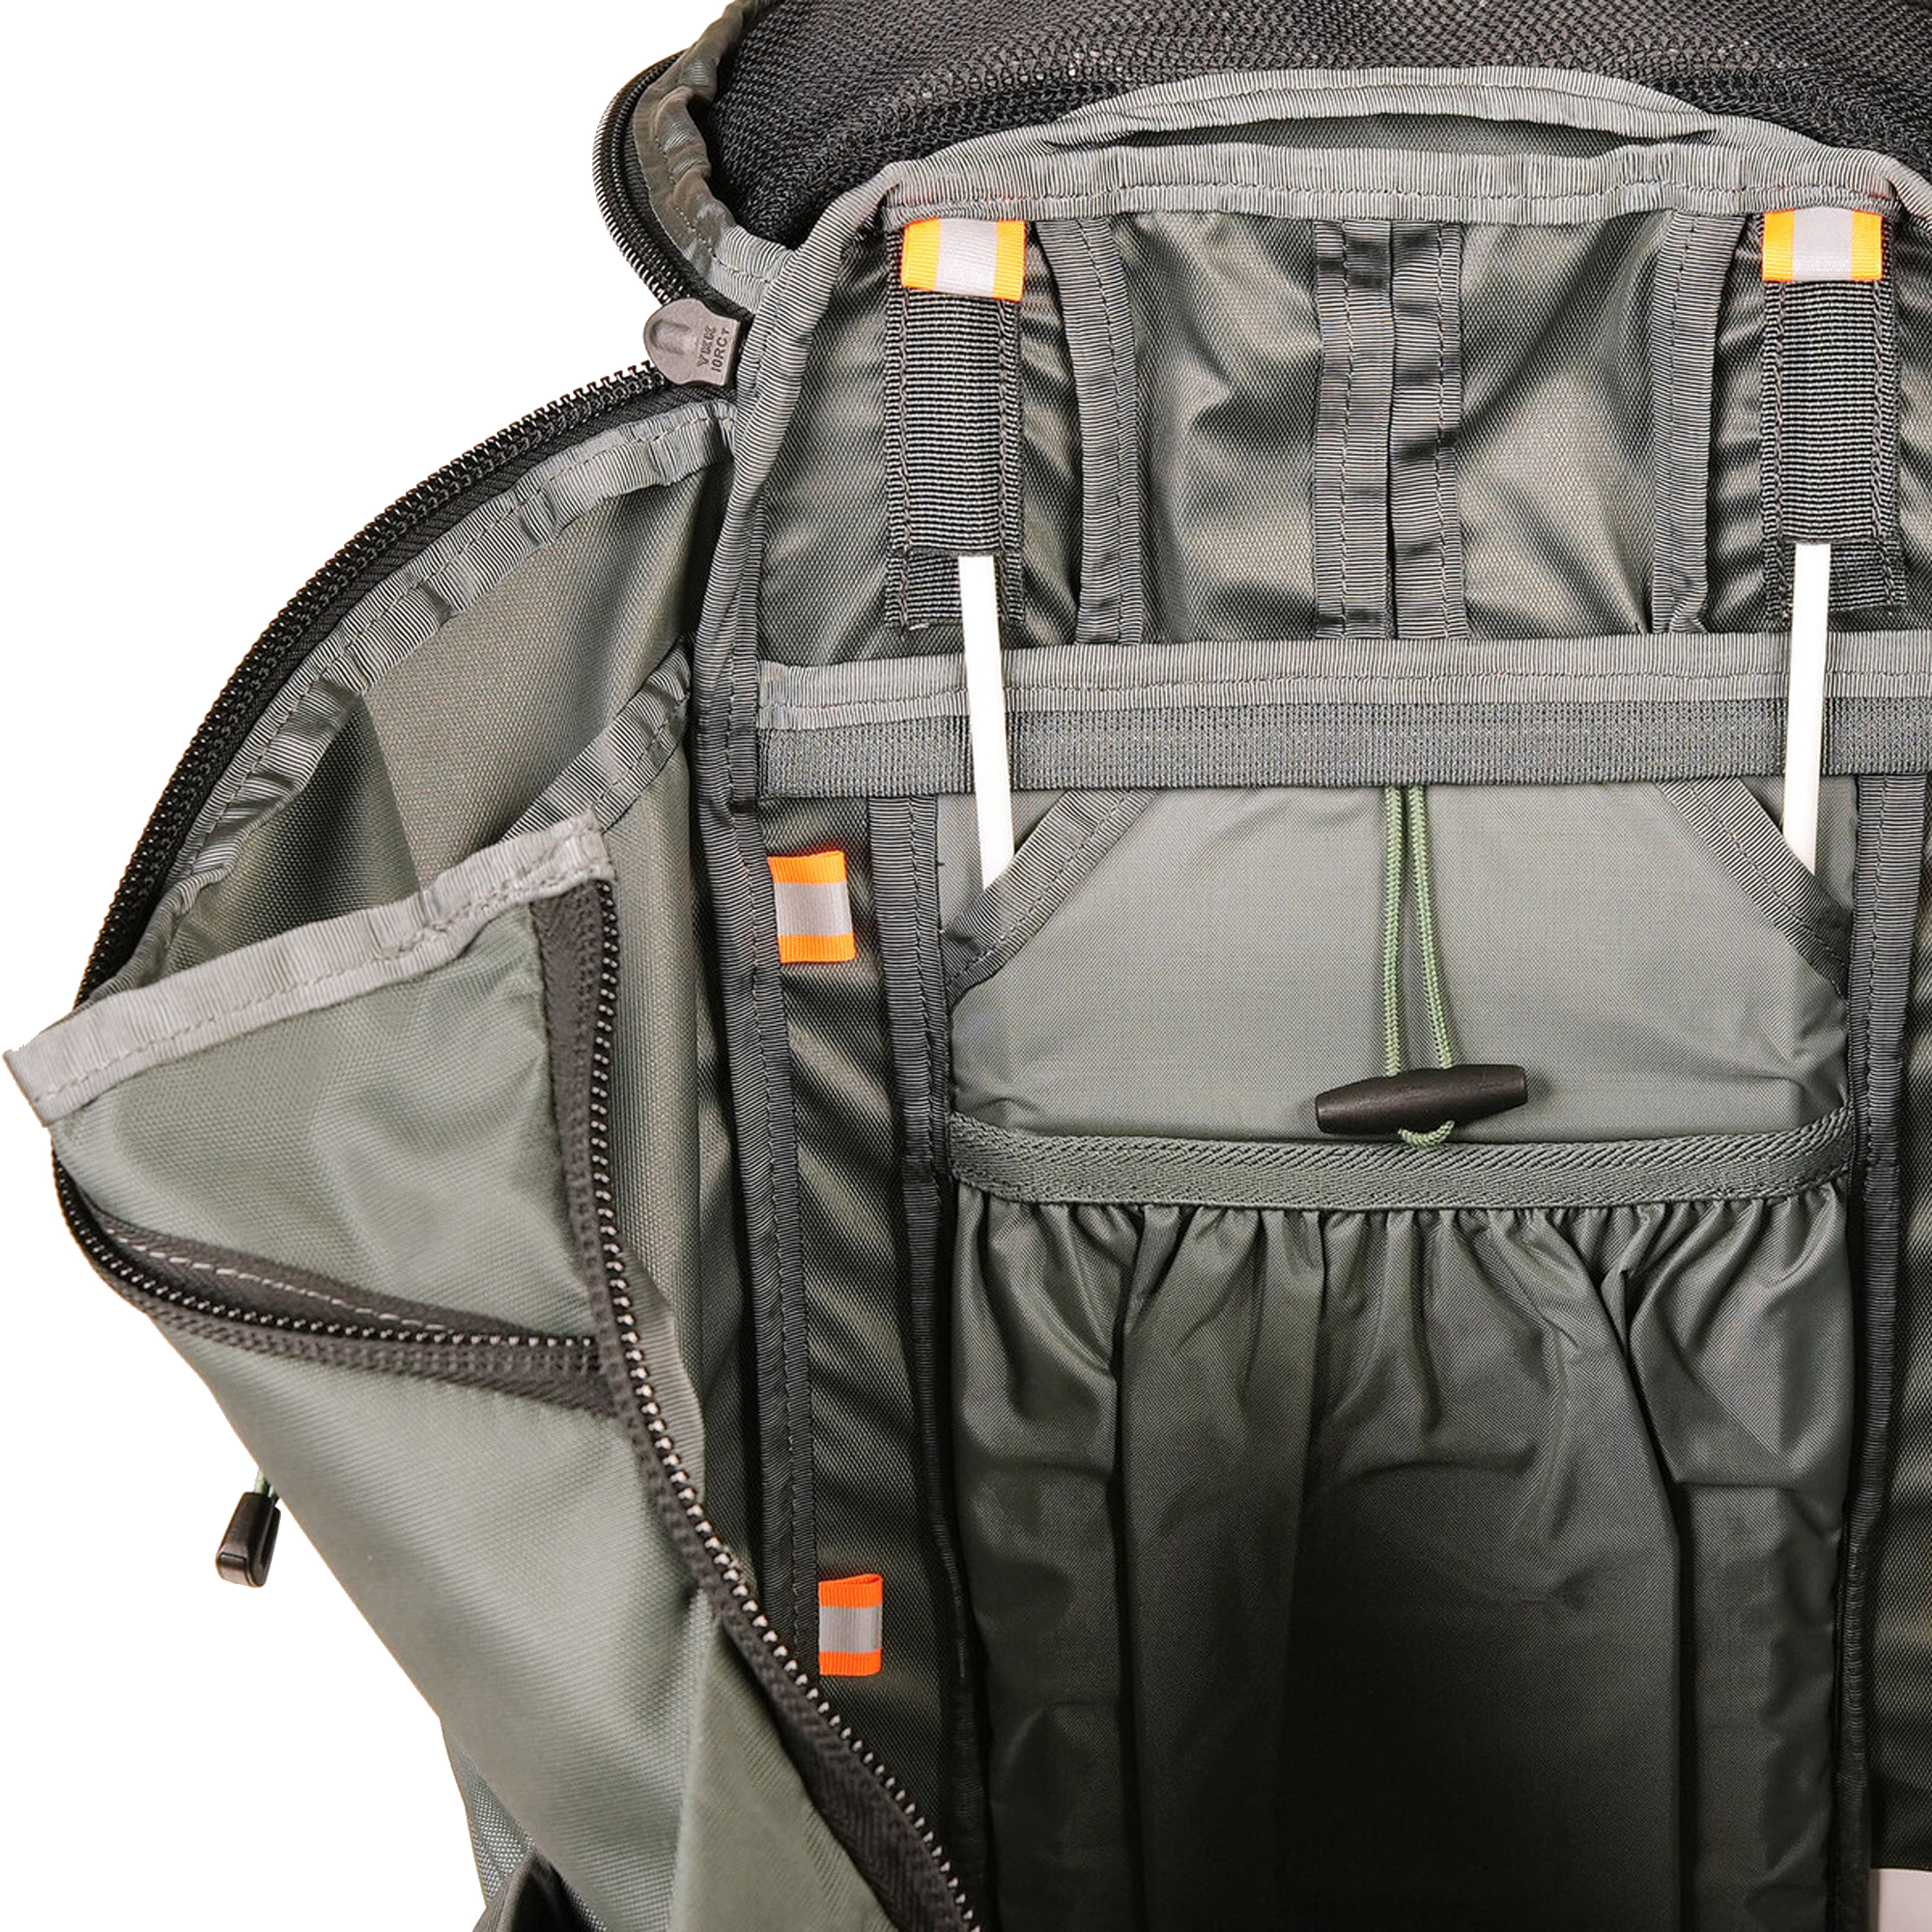 Mystery Ranch  Coulee 40 Hiking & Trekking Backpack